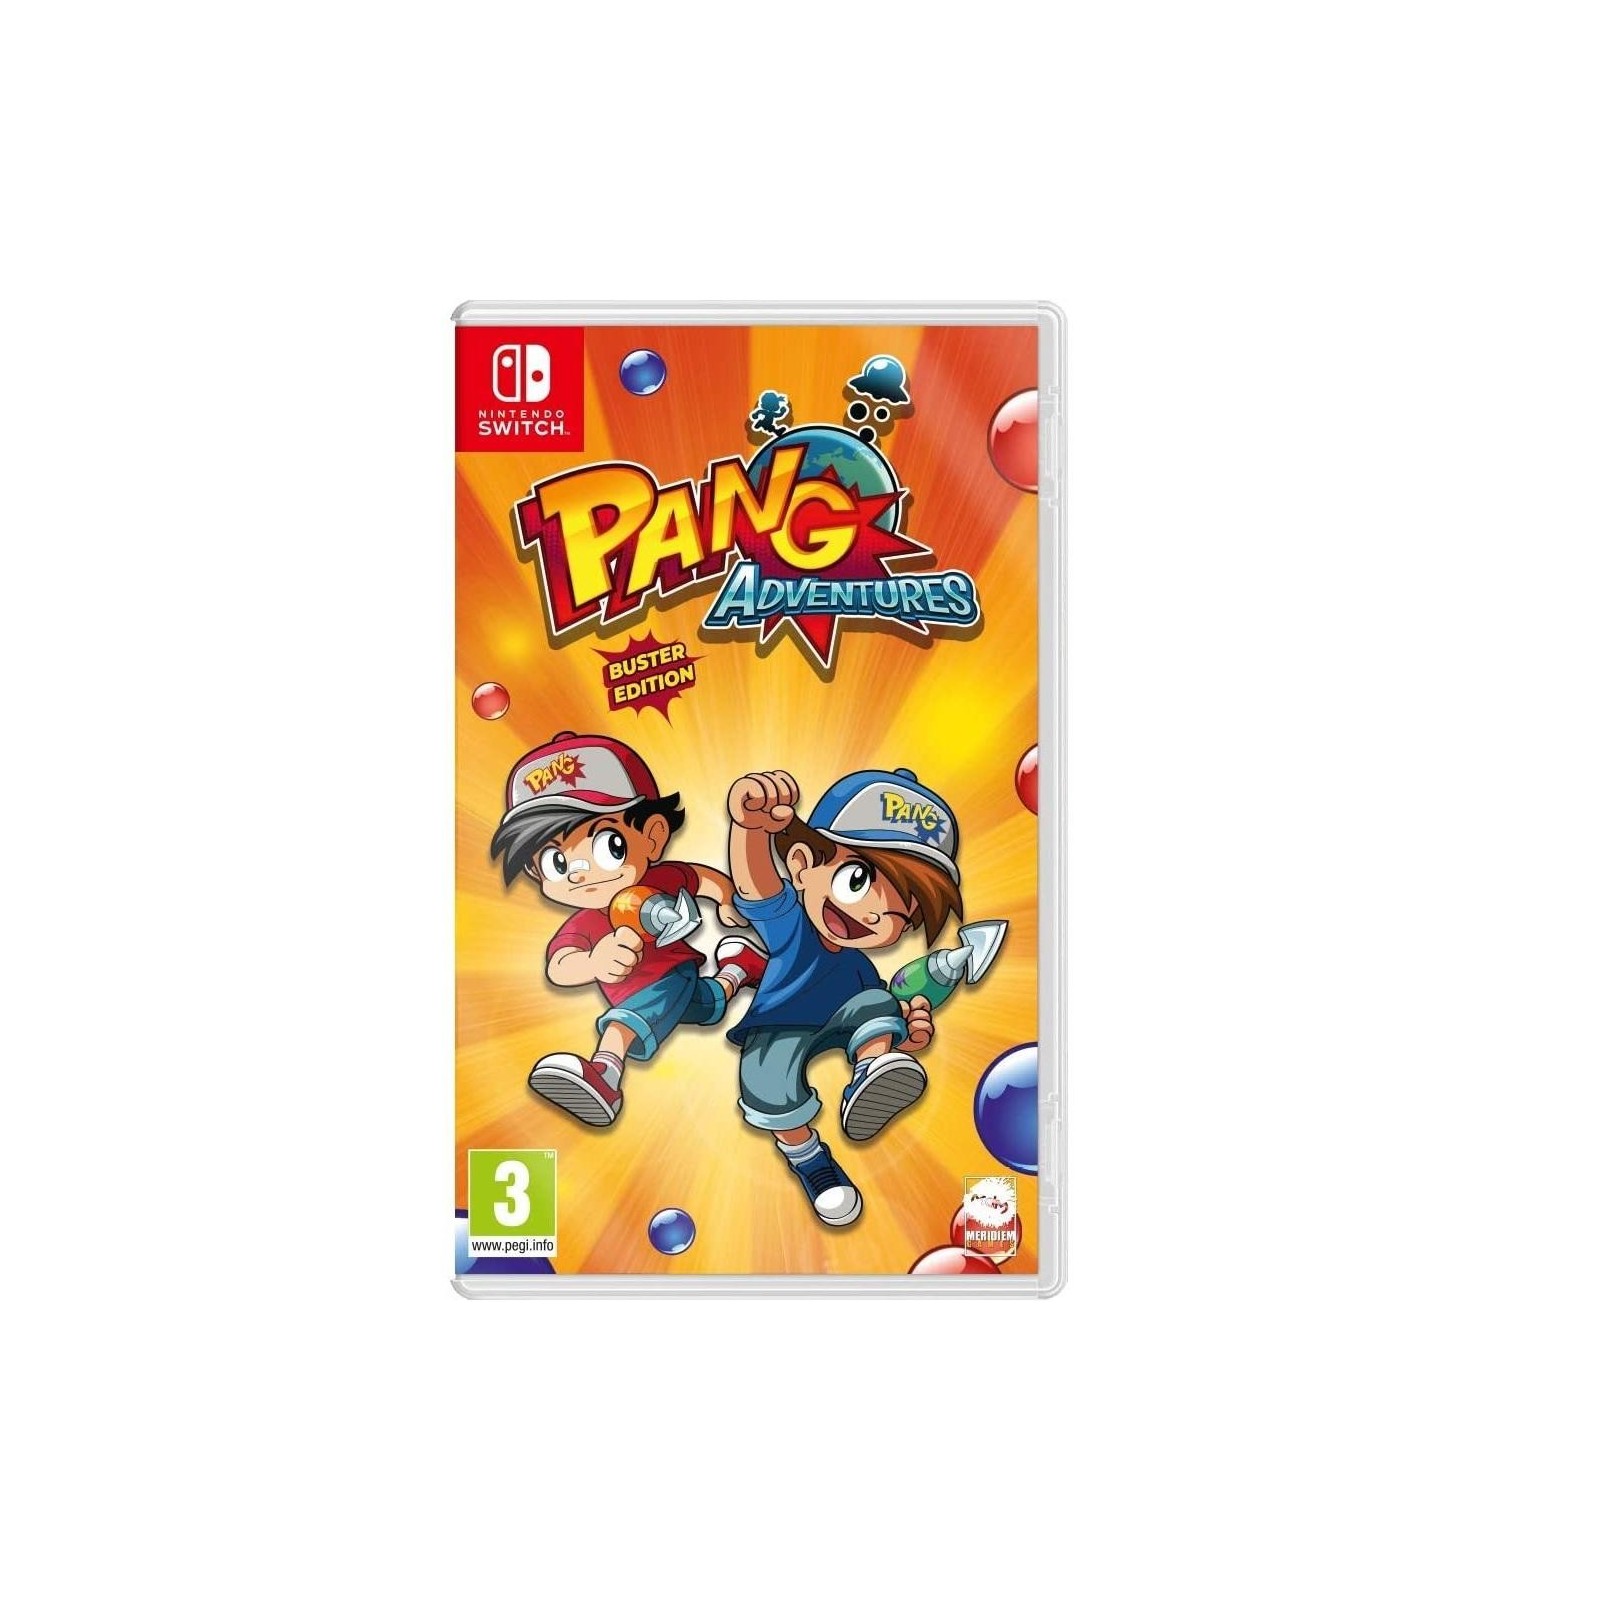 Pang Adventures Buster Edition Switch